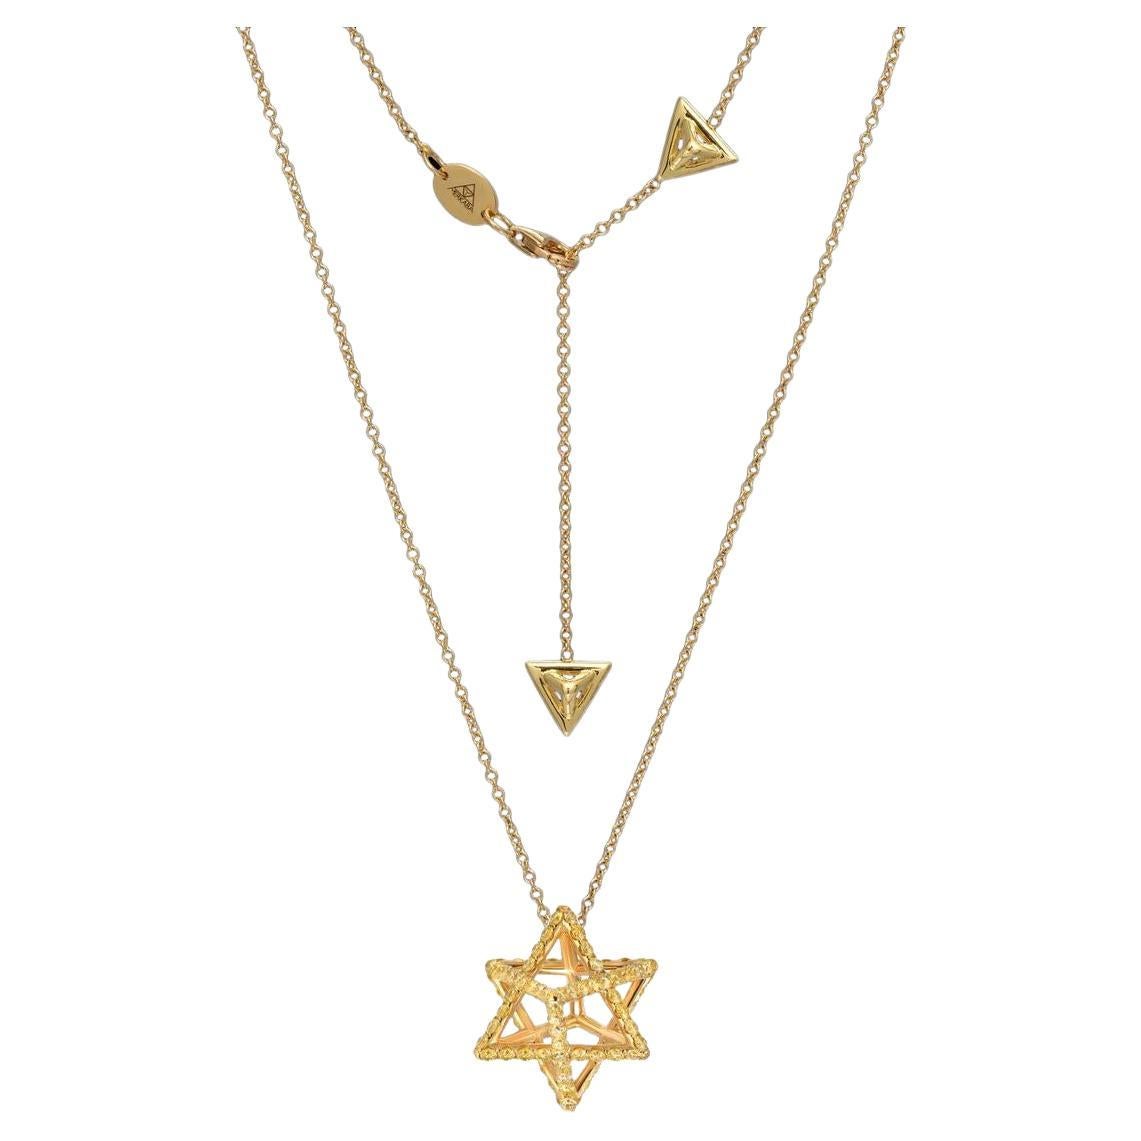 Round Cut Yellow Diamond Necklace Merkaba Star 1.28 Carats For Sale